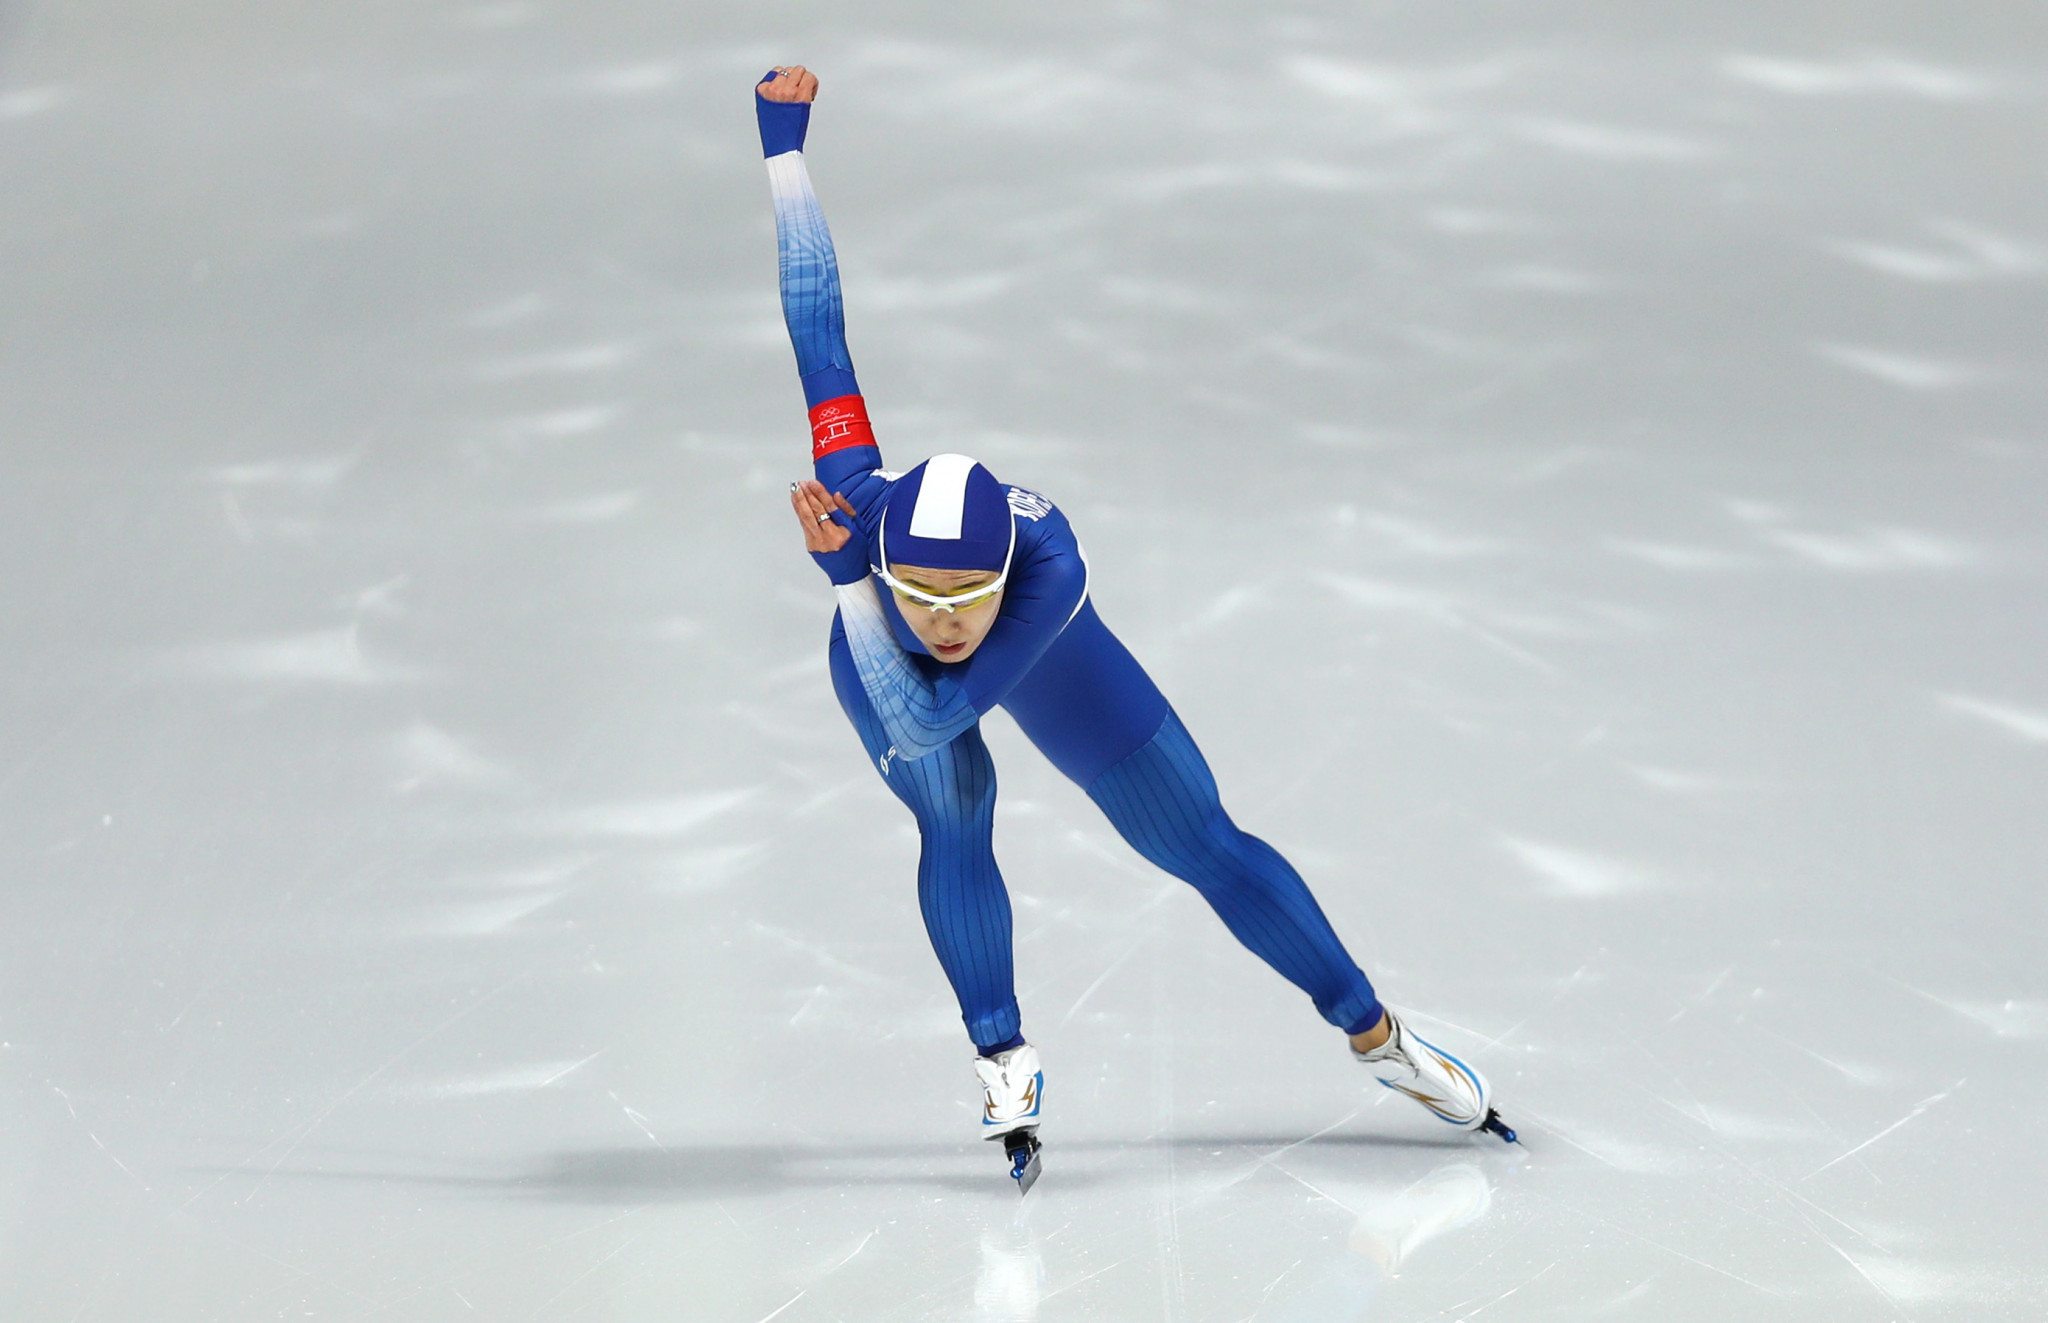 A total of 61.7 per cent of South Koreans tuned in to watch Lee Sang-hwa in the women's 500m speed skating final ©Getty Images